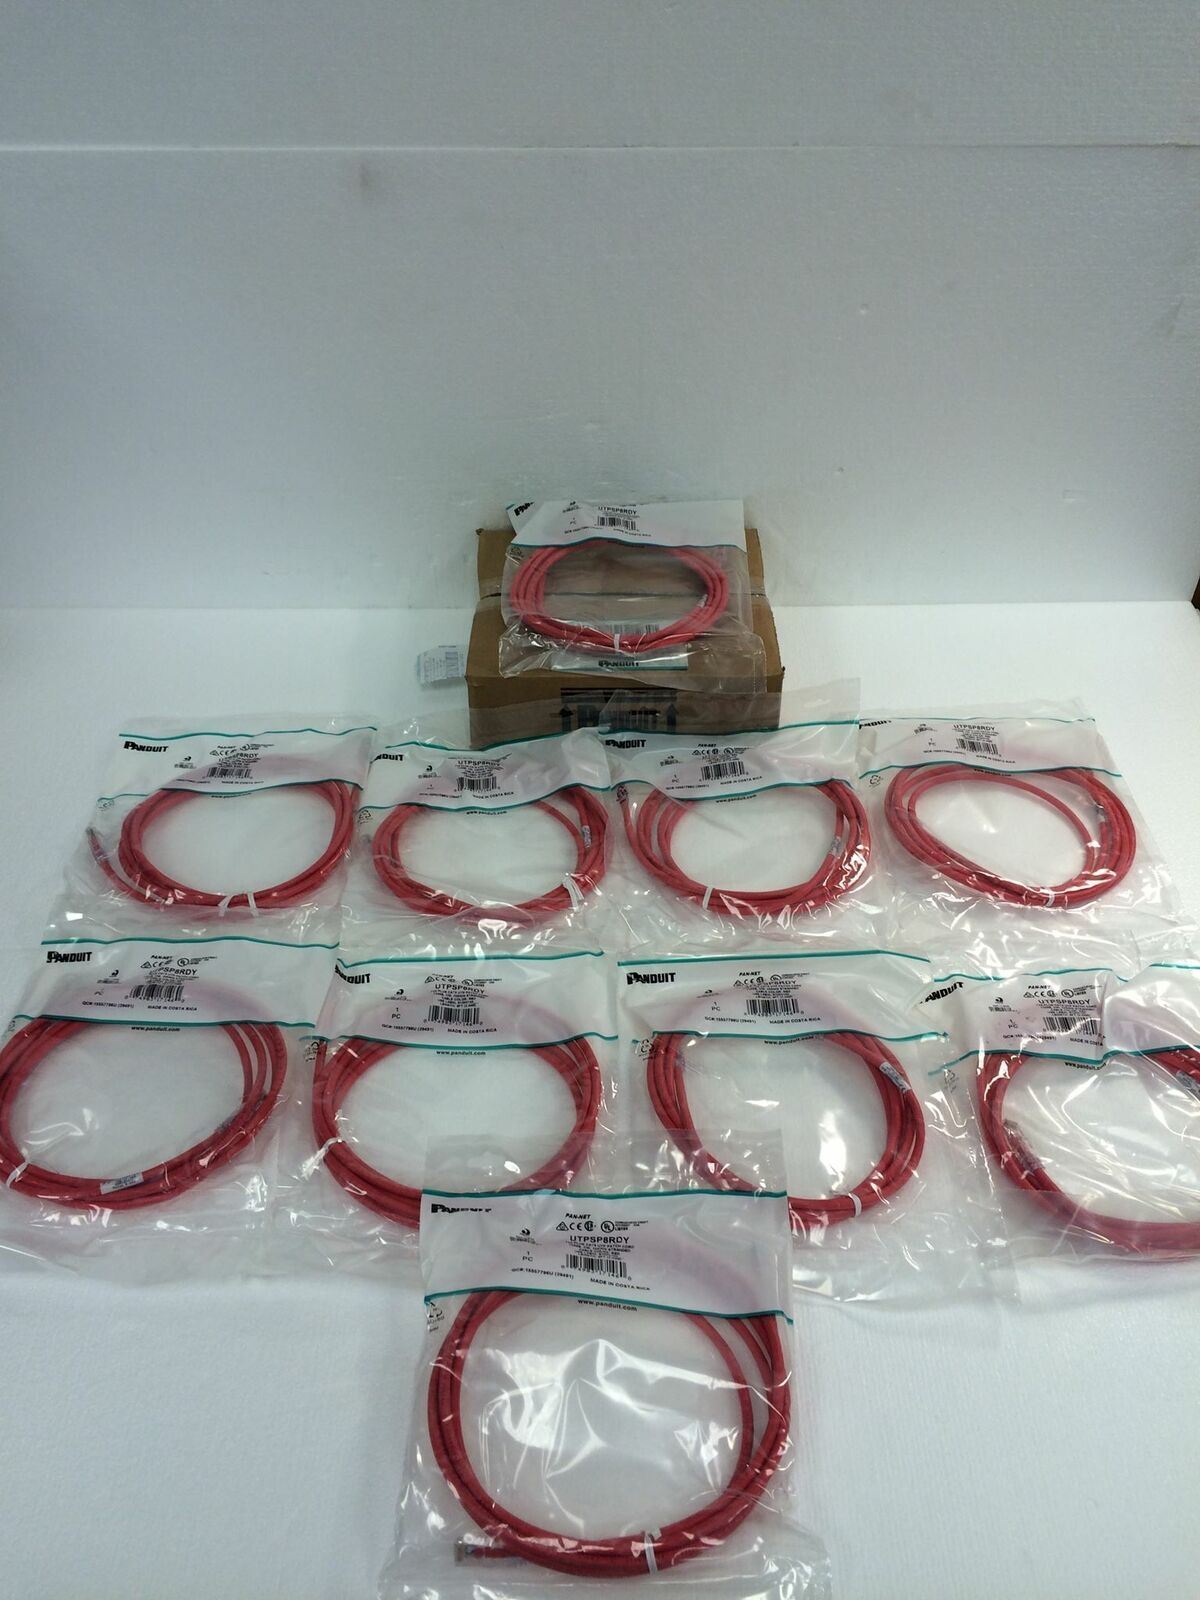 One Box of 10 NEW Panduit CAT-6 Patch Red Cable 8ft UTPSP8RDY 